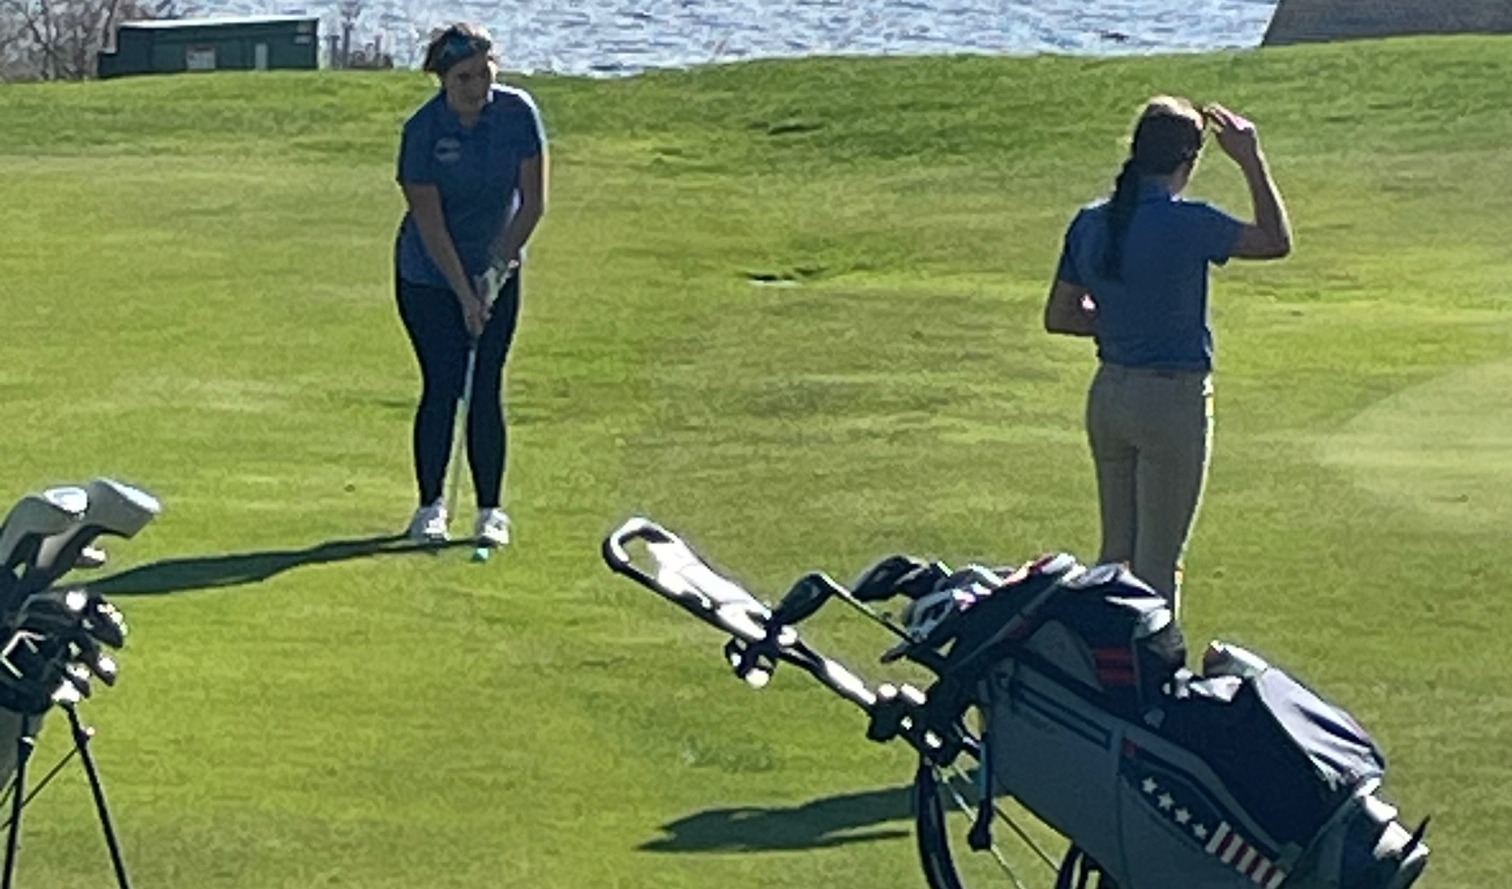 Two students play golf near a body of water